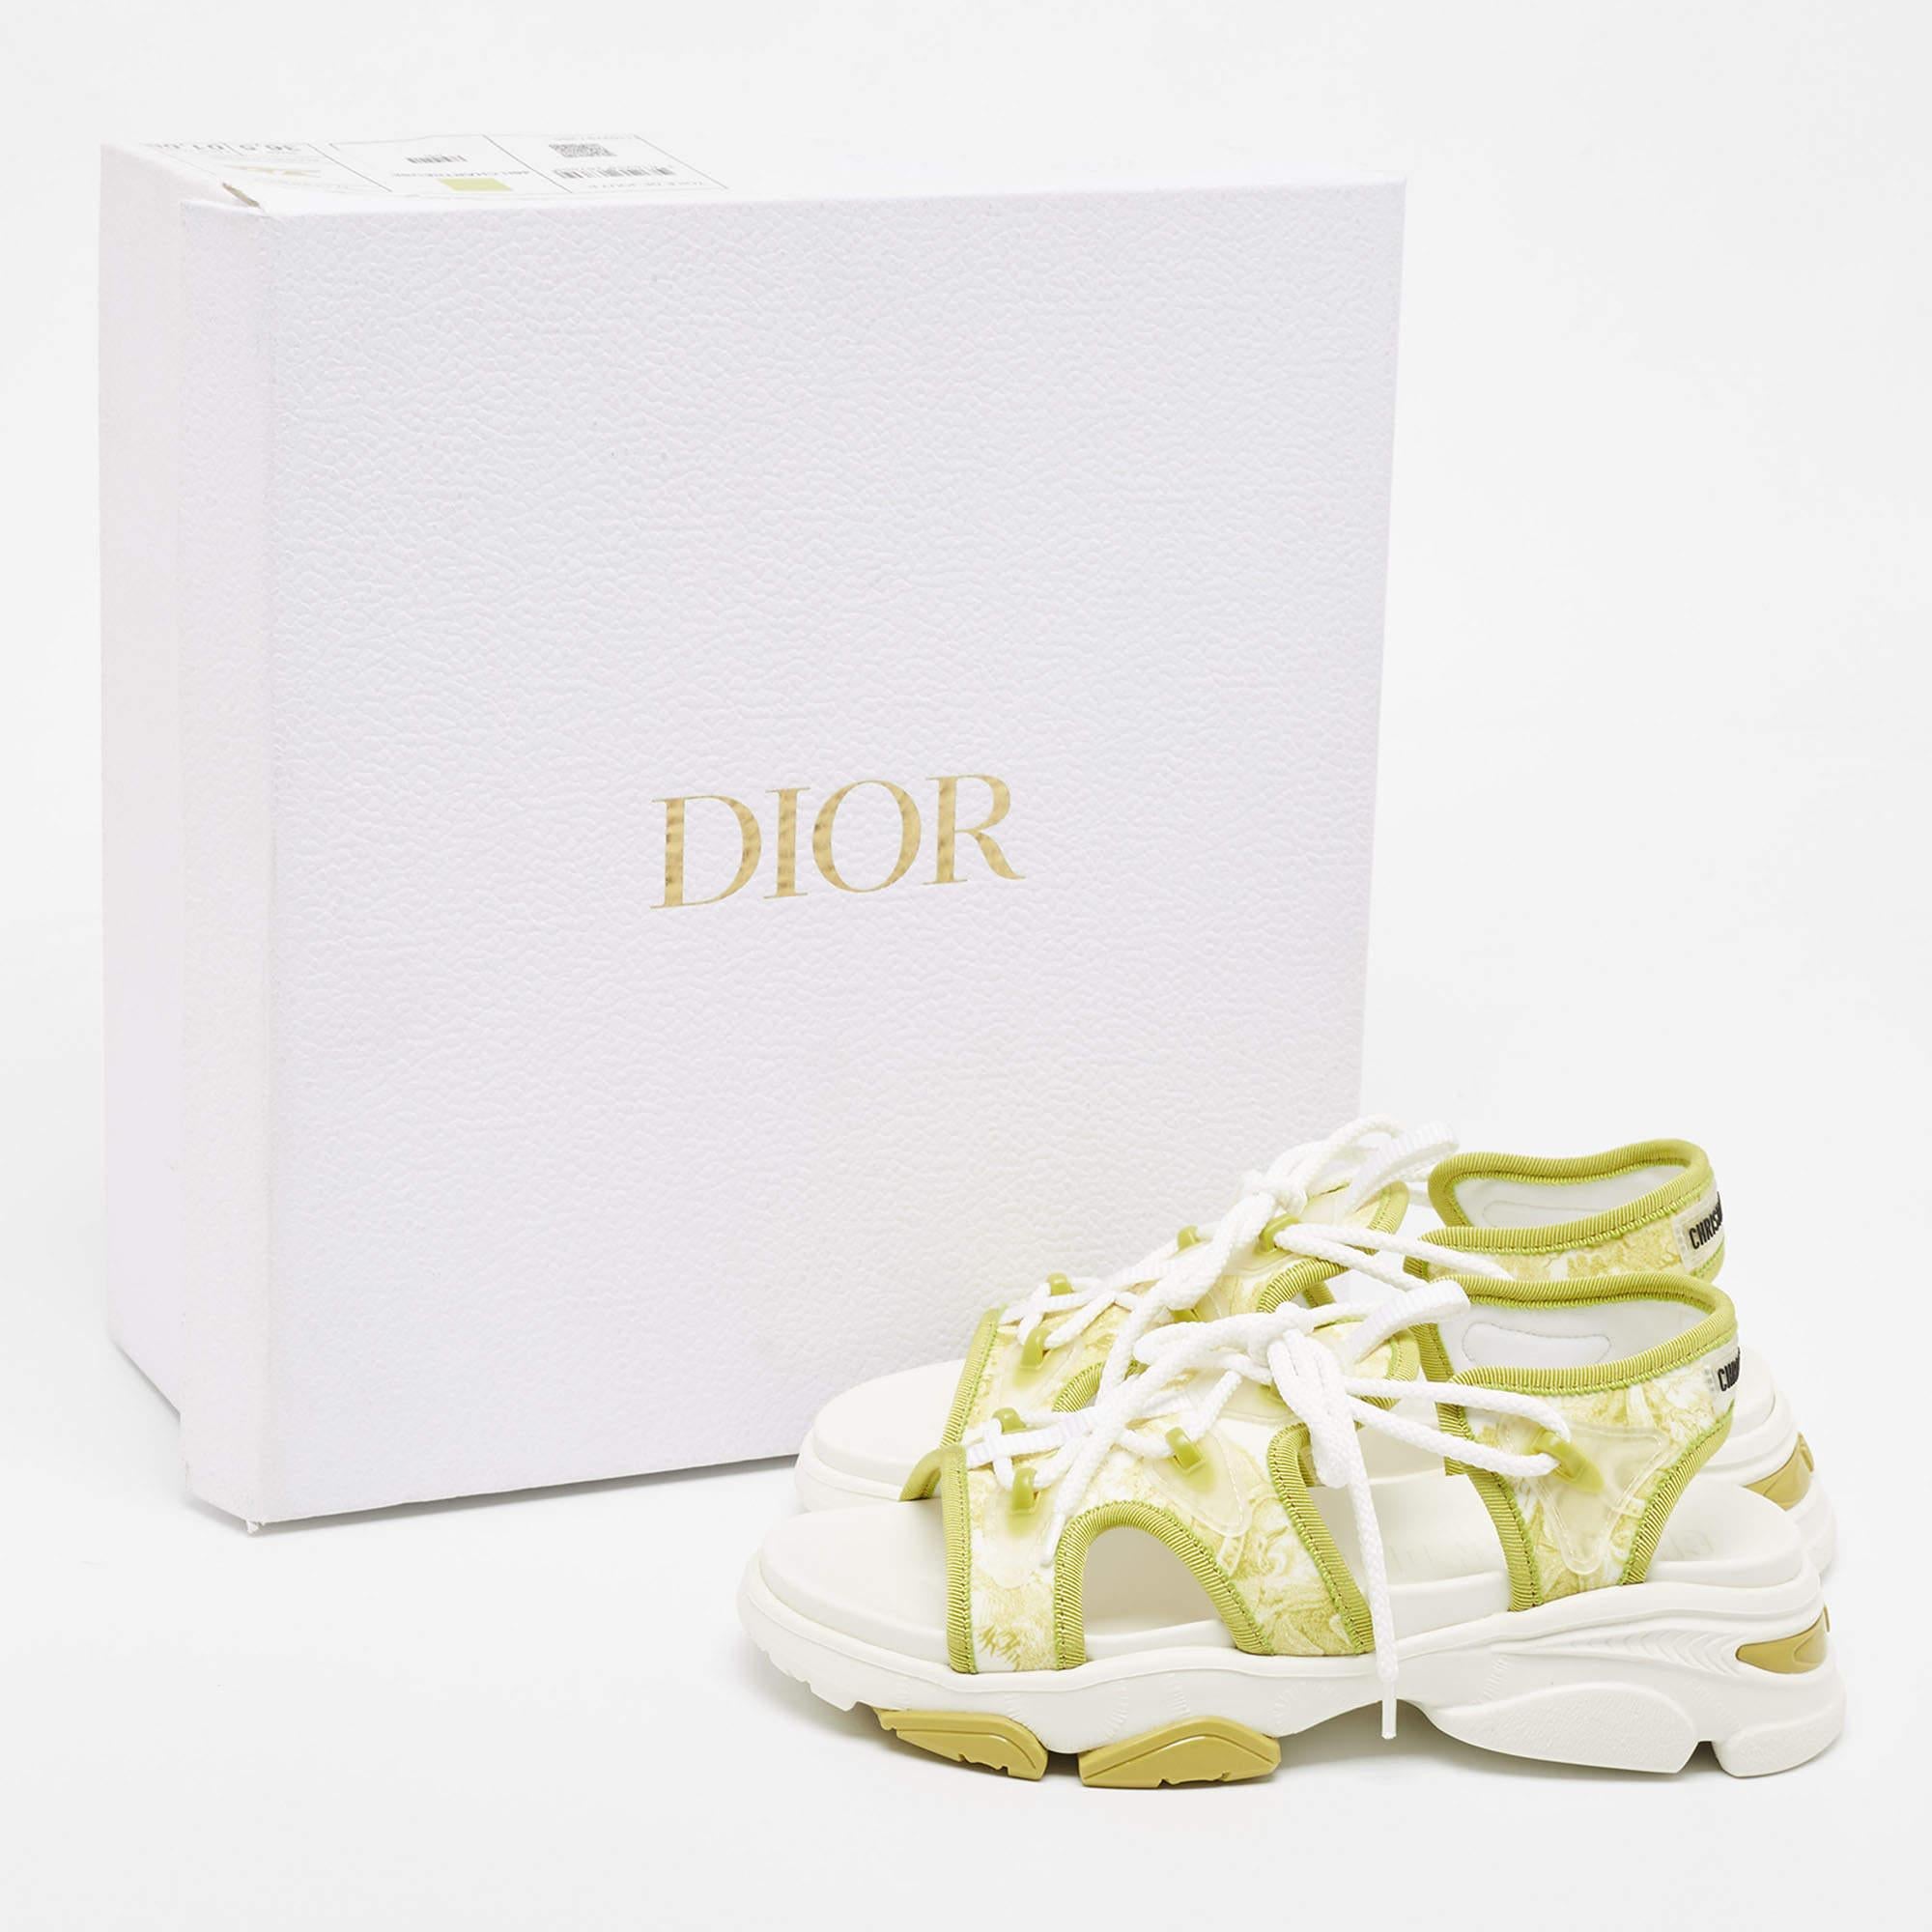 Dior Green/White Neoprene and PVC D-Connect Sandals Size 36.5 5